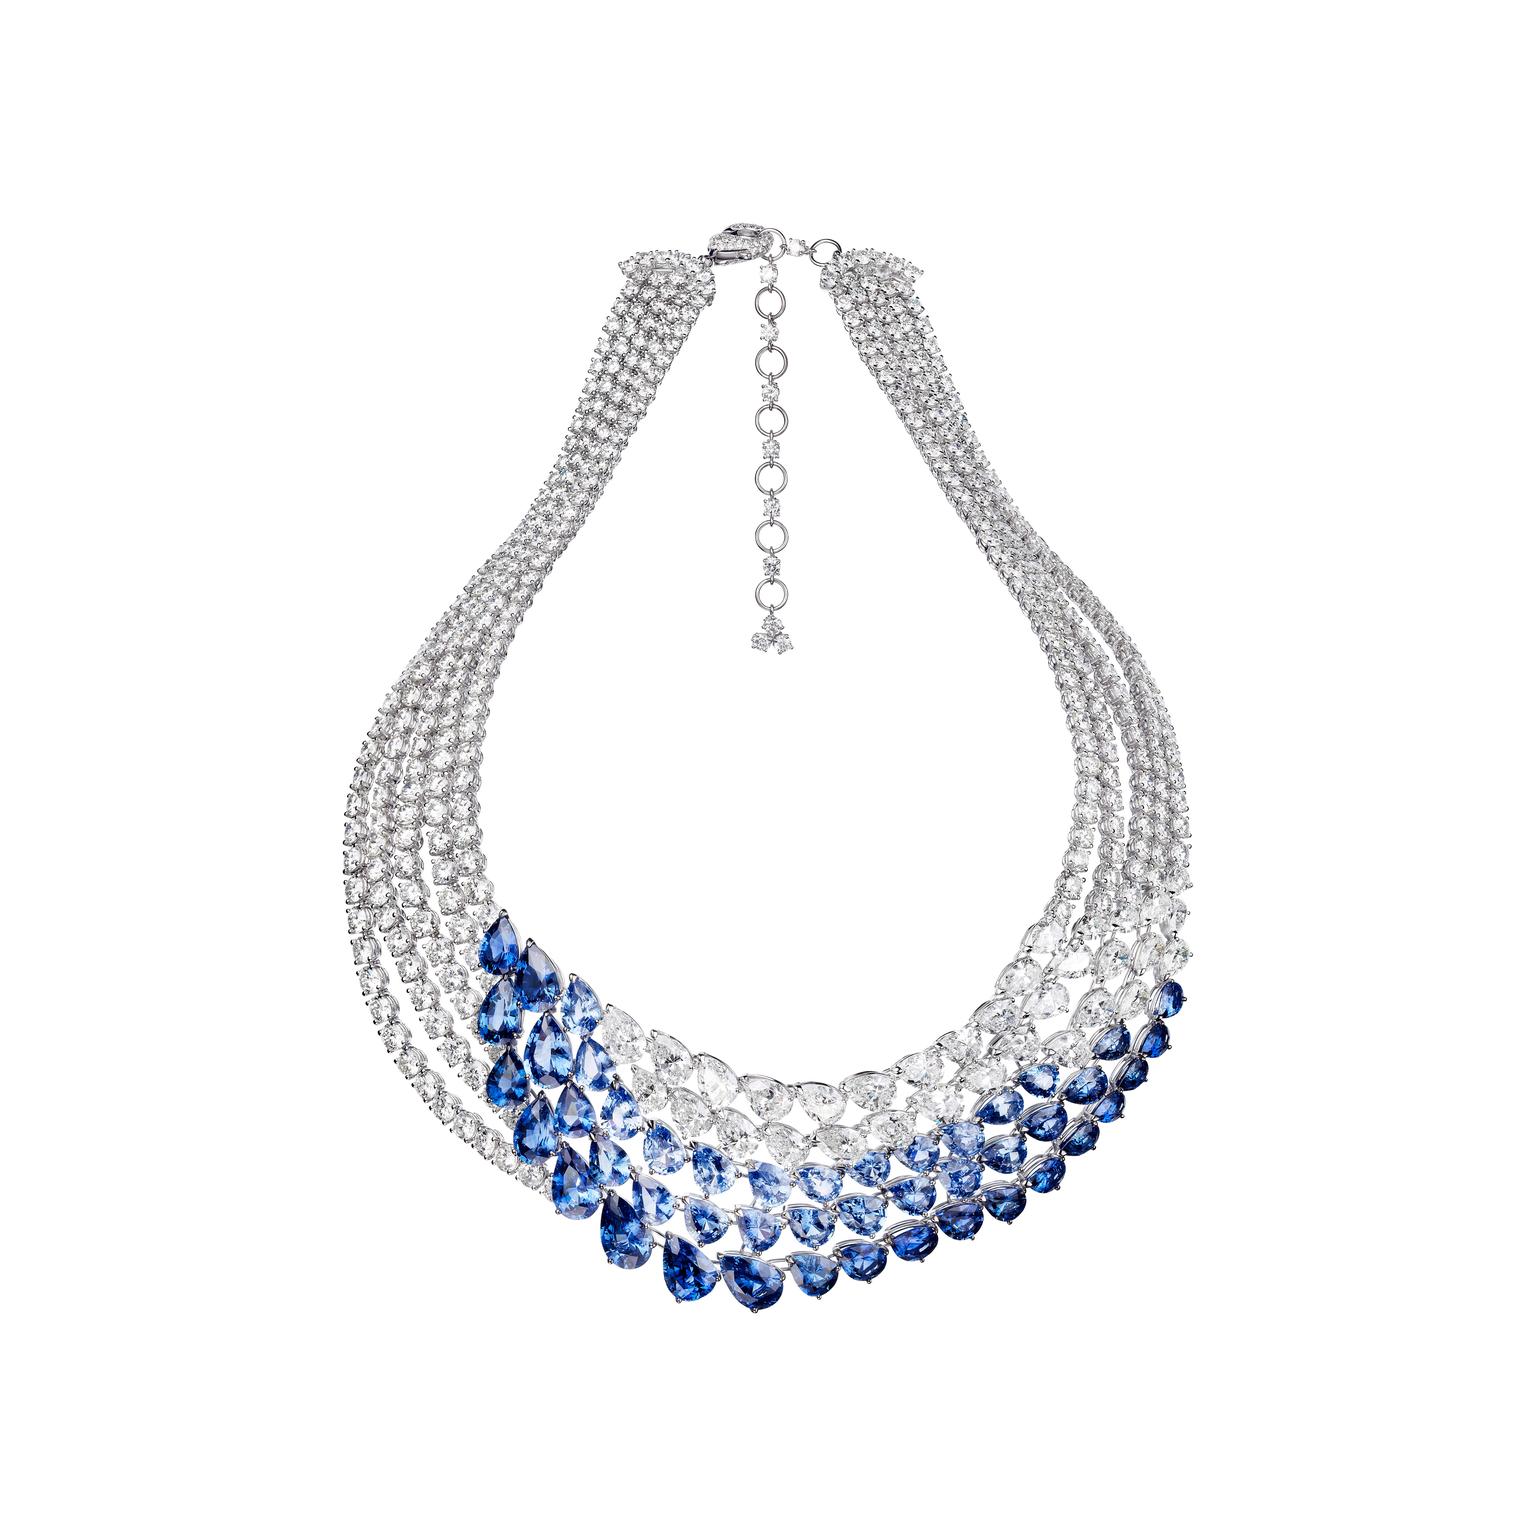 The new Adler high jewellery L'Oiseau Bleu necklace is set with 46 pear-shaped sapphires totalling more than 60ct in different tones of blue, which caress the neck along with a cascade of white diamonds.